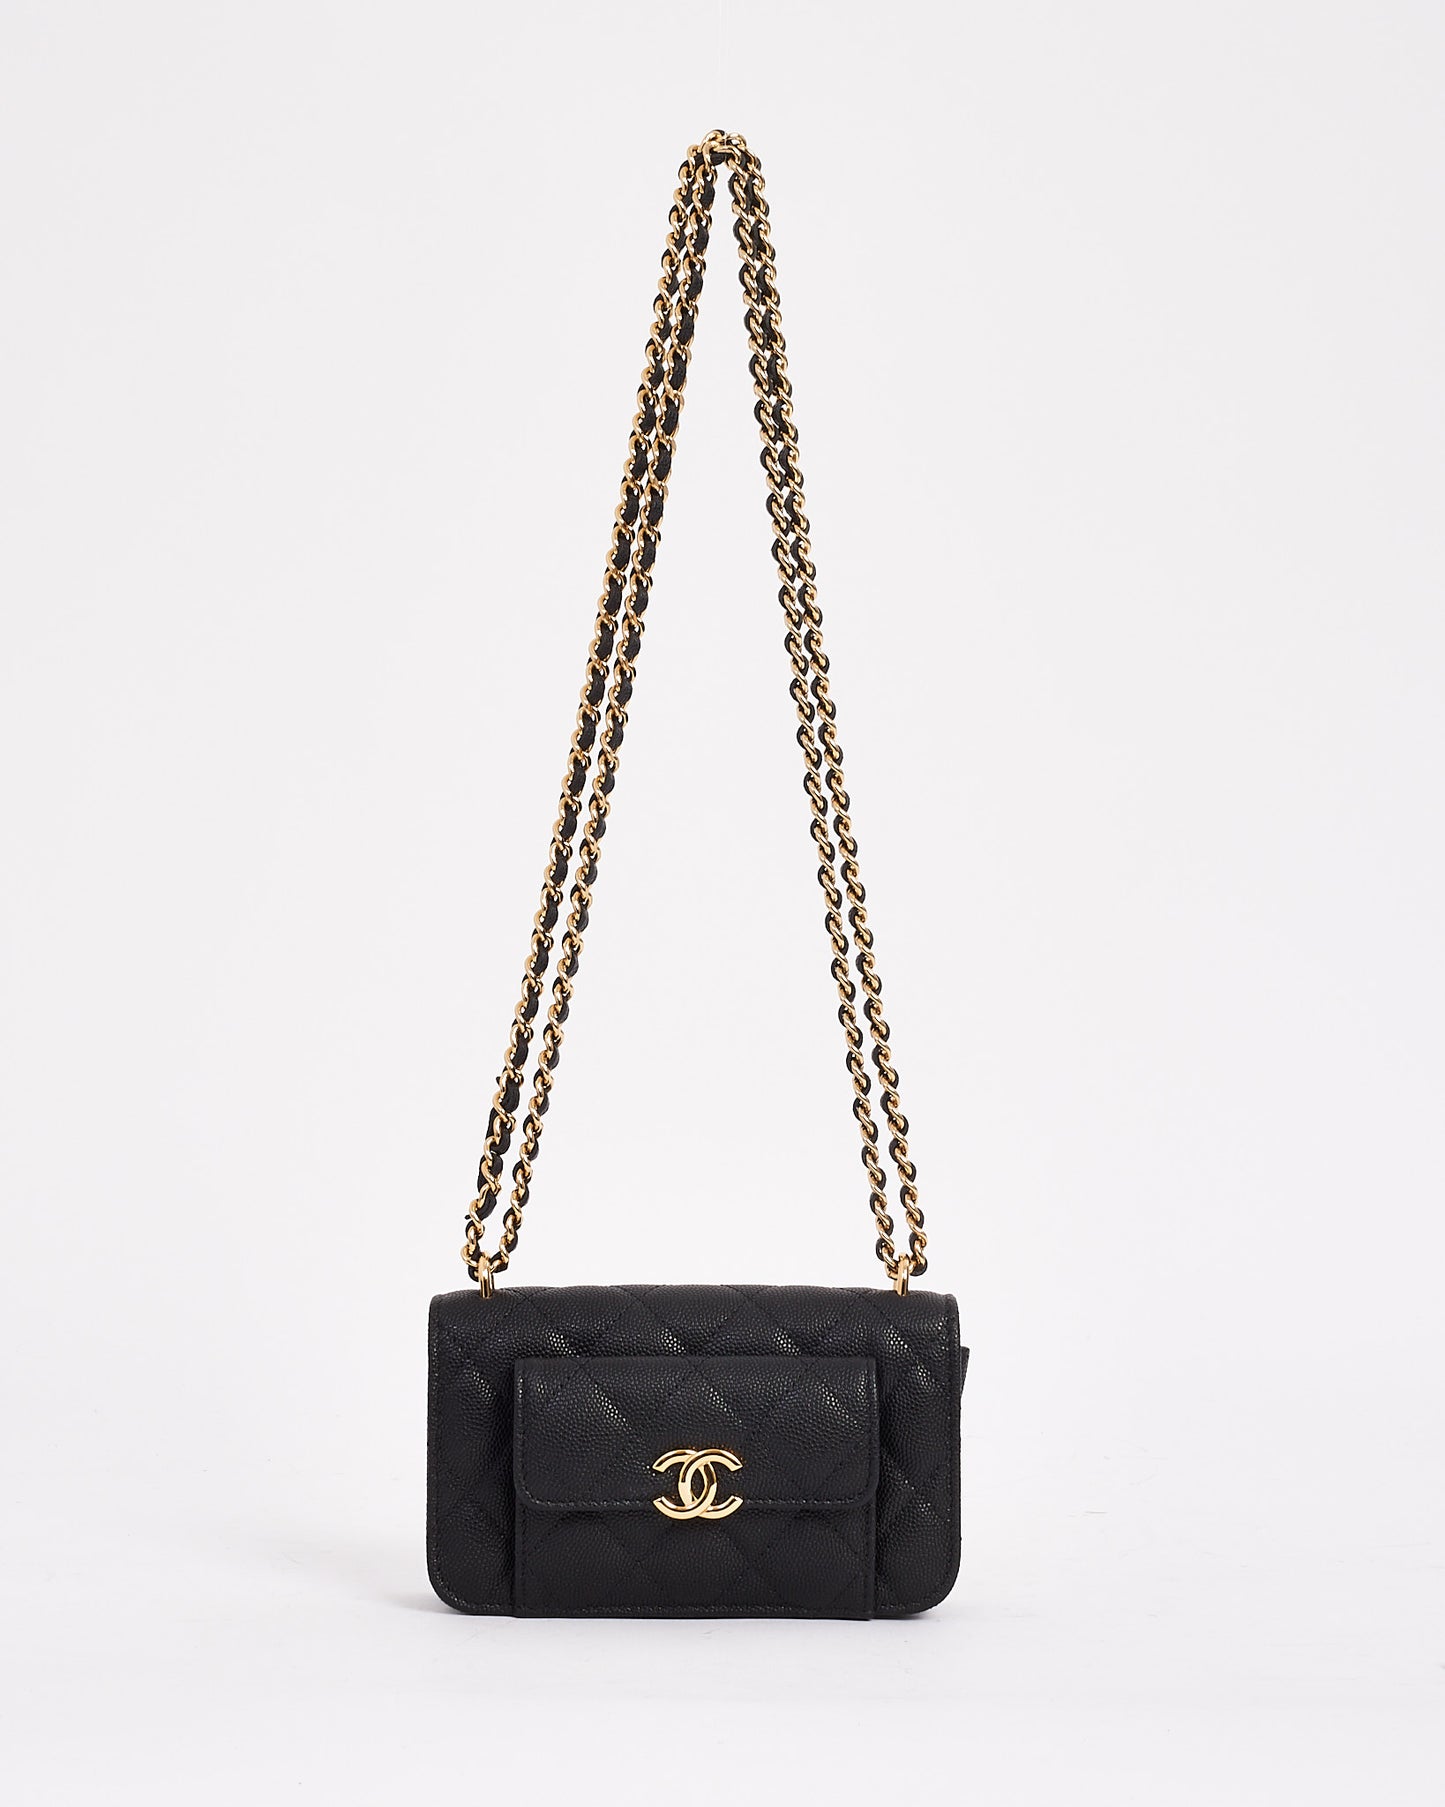 Chanel Black Caviar Leather Pocket Twin Clutch with Chain GHW